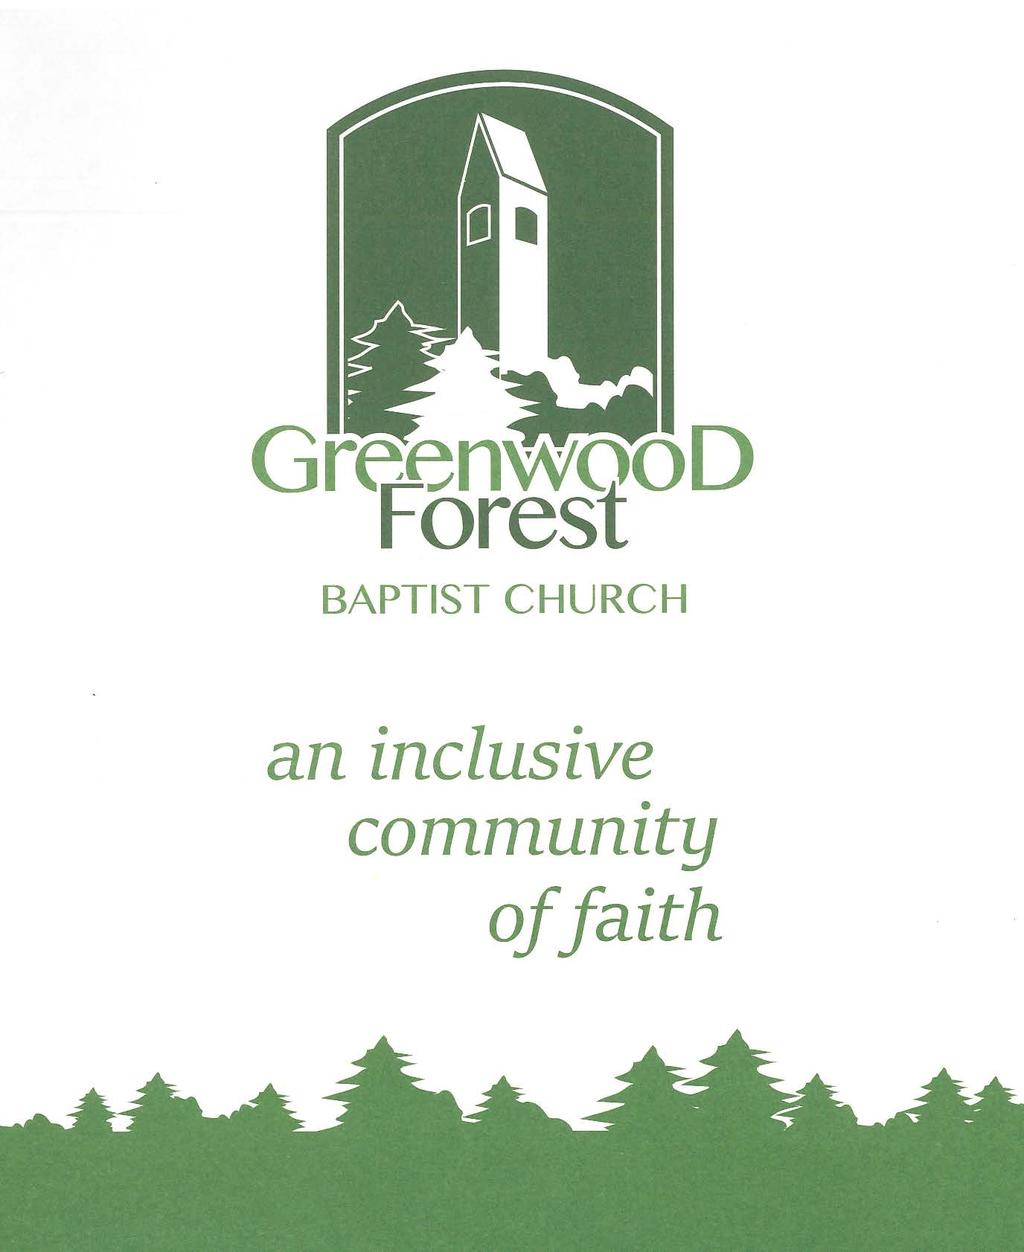 GREENWOOD FOREST BAPTIST CHURCH The Worship of God The First Sunday of Lent March 10, 2019 Chiming of the Hour Processional Hymn 471 Welcome to Worship Come, Ye Sinners, Poor and Needy Rev.